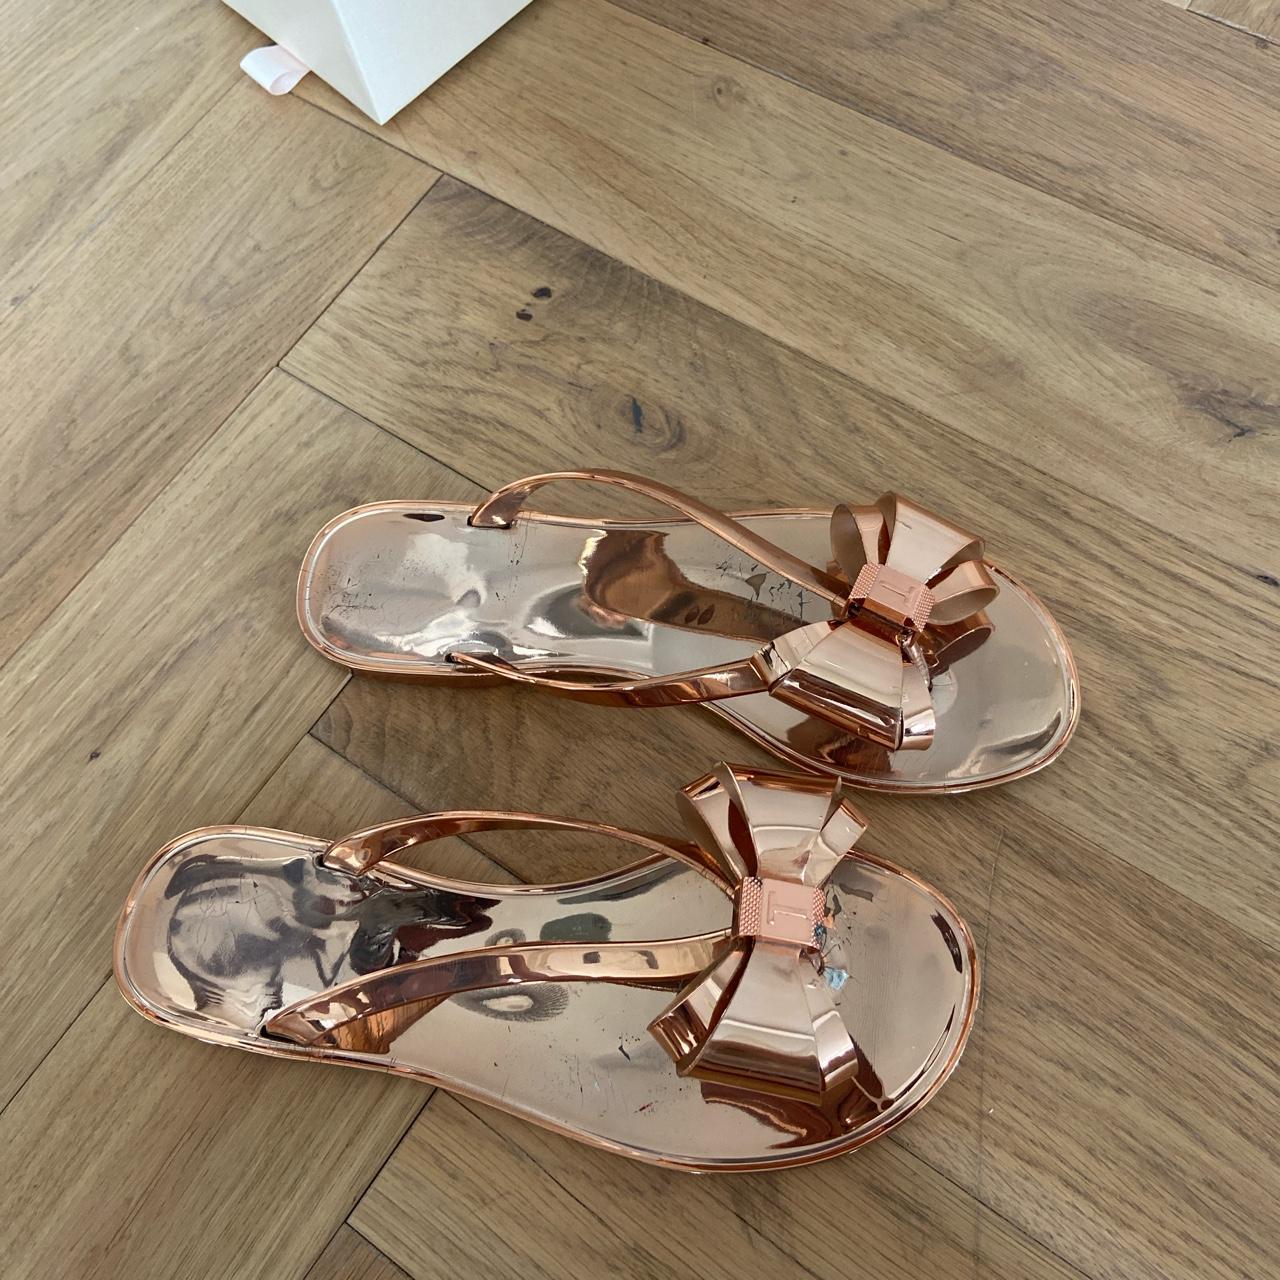 Ted Baker | Shoes | Ted Baker Bolt On Two Strap Jelly Sandals Size 38 |  Poshmark